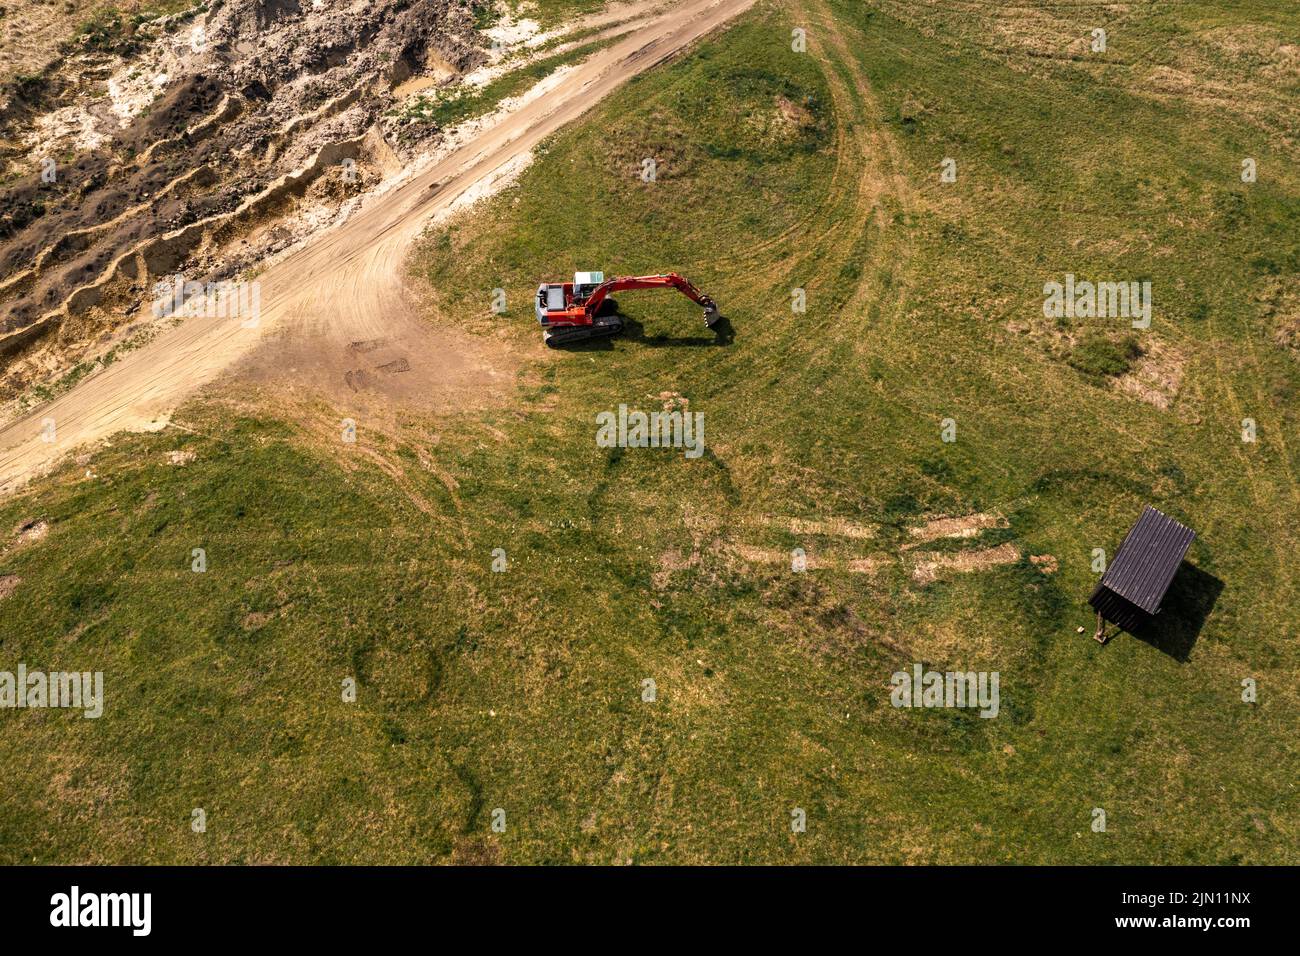 Excavator machinery on archeological site, aerial shot from drone pov, high angle view Stock Photo